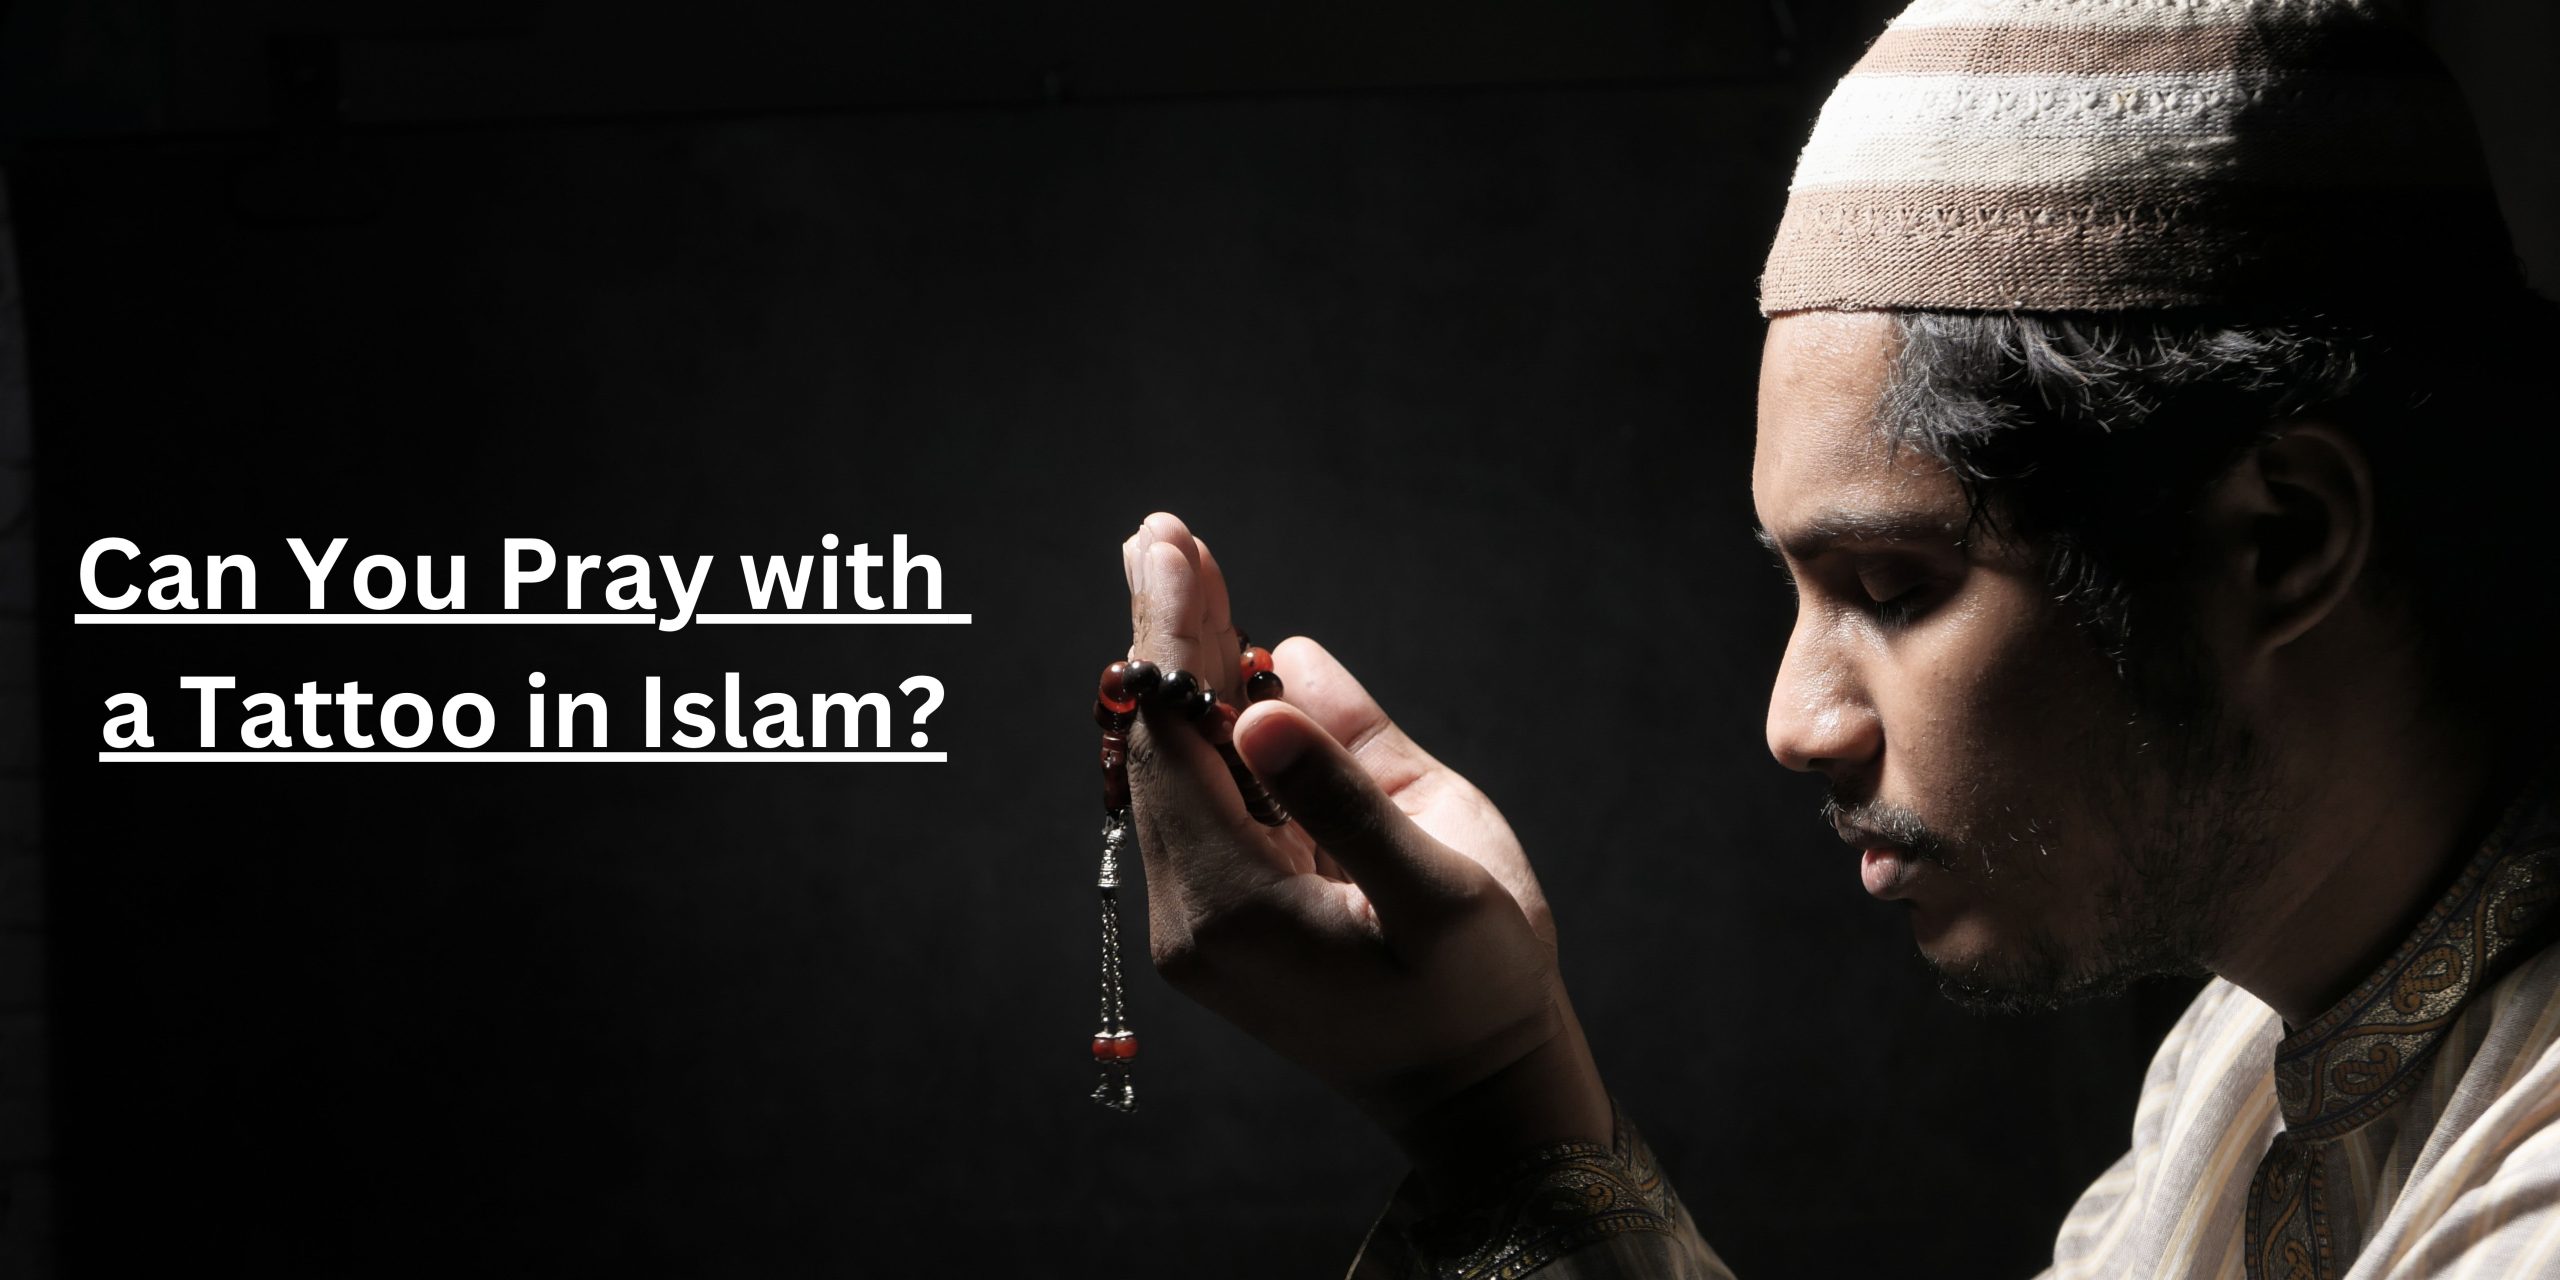 Can You Pray with a Tattoo in Islam?